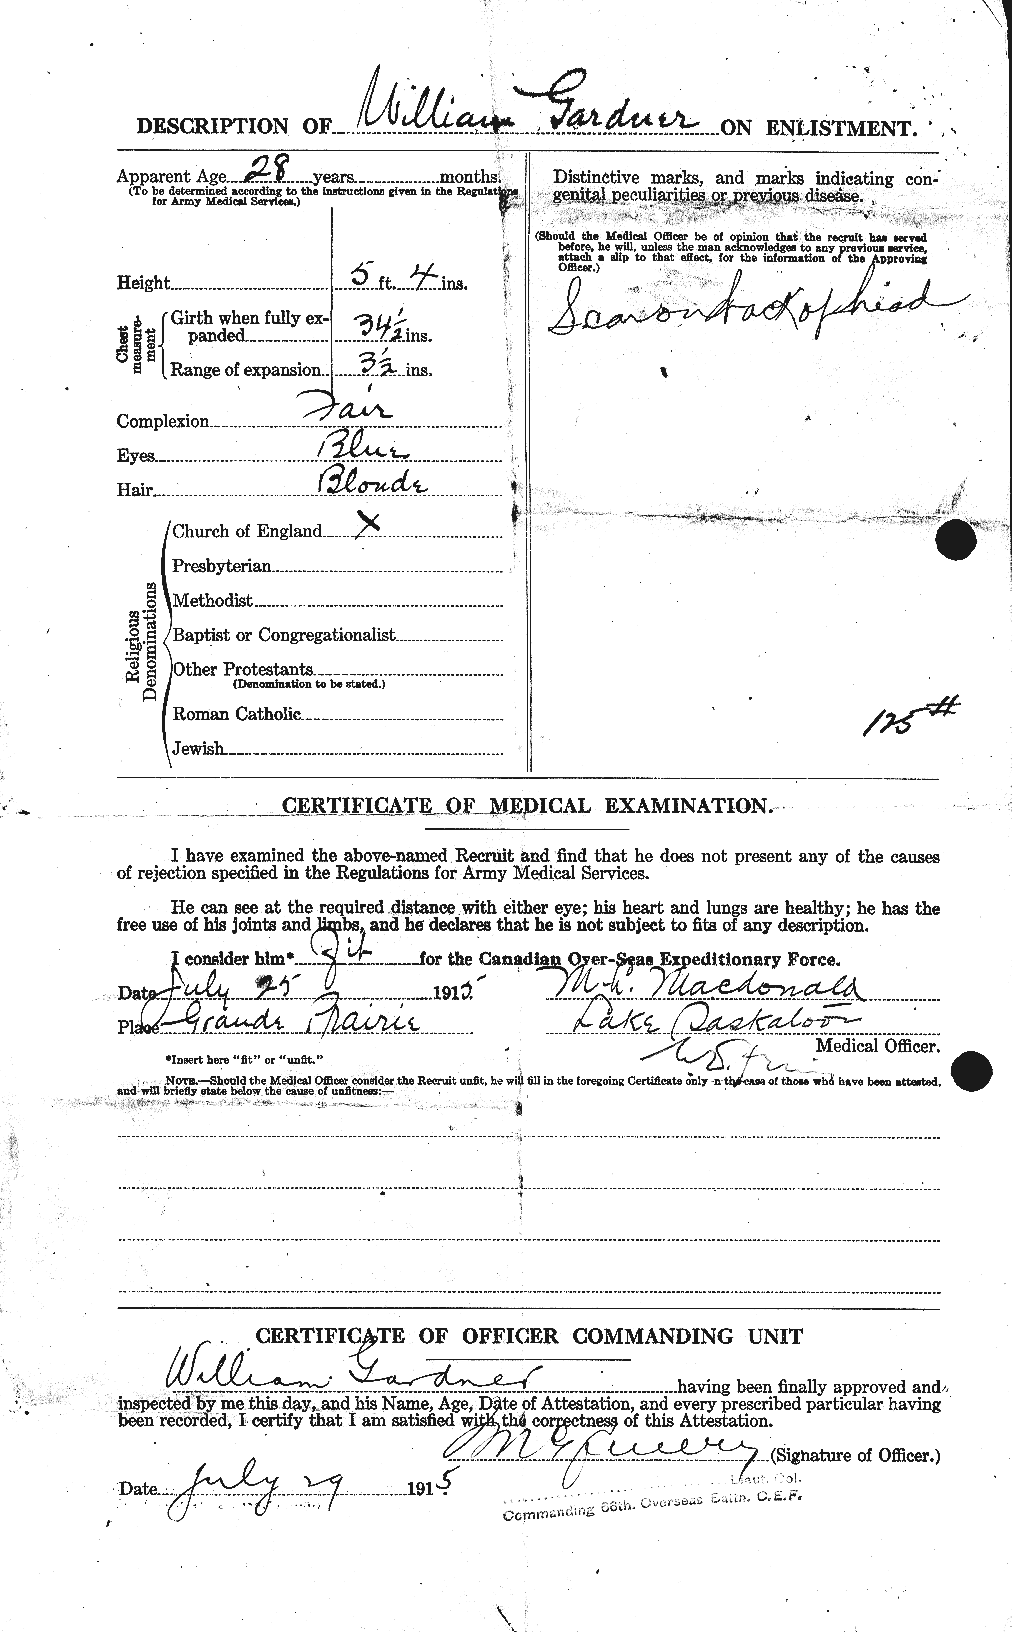 Personnel Records of the First World War - CEF 345849b